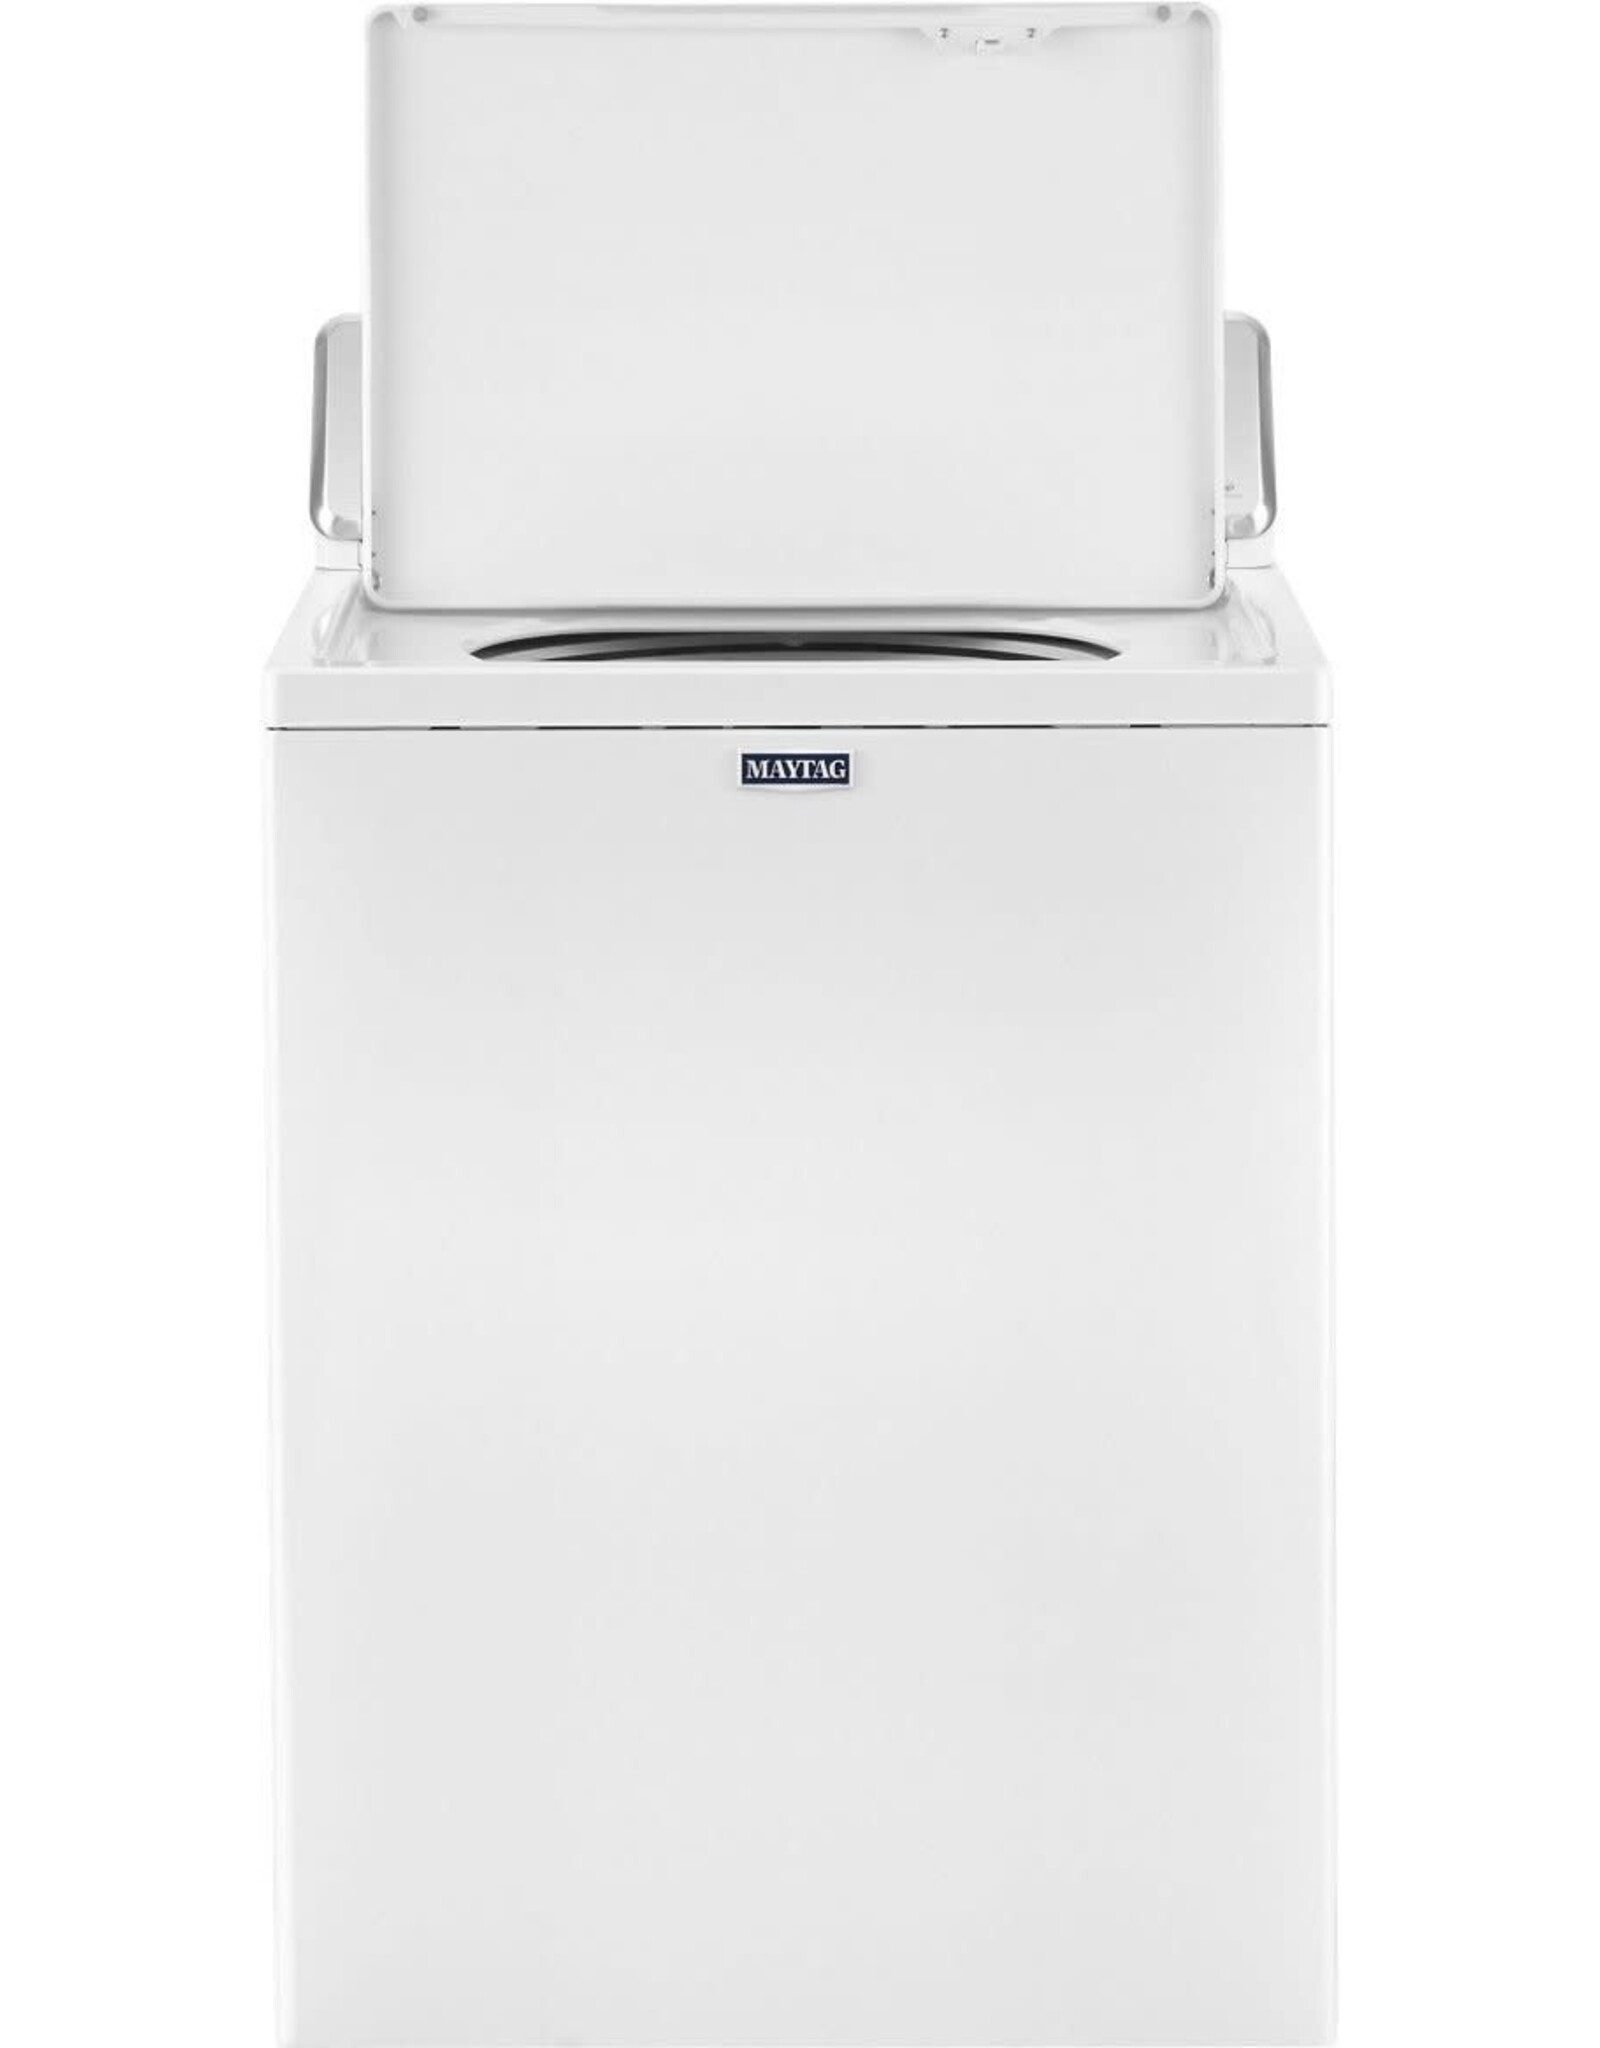 MAYTAG TOP LOAD WASHER WITH THE DEEP WATER WASH OPTION AND POWERWASH® CYCLE – 4.2 CU. FT.